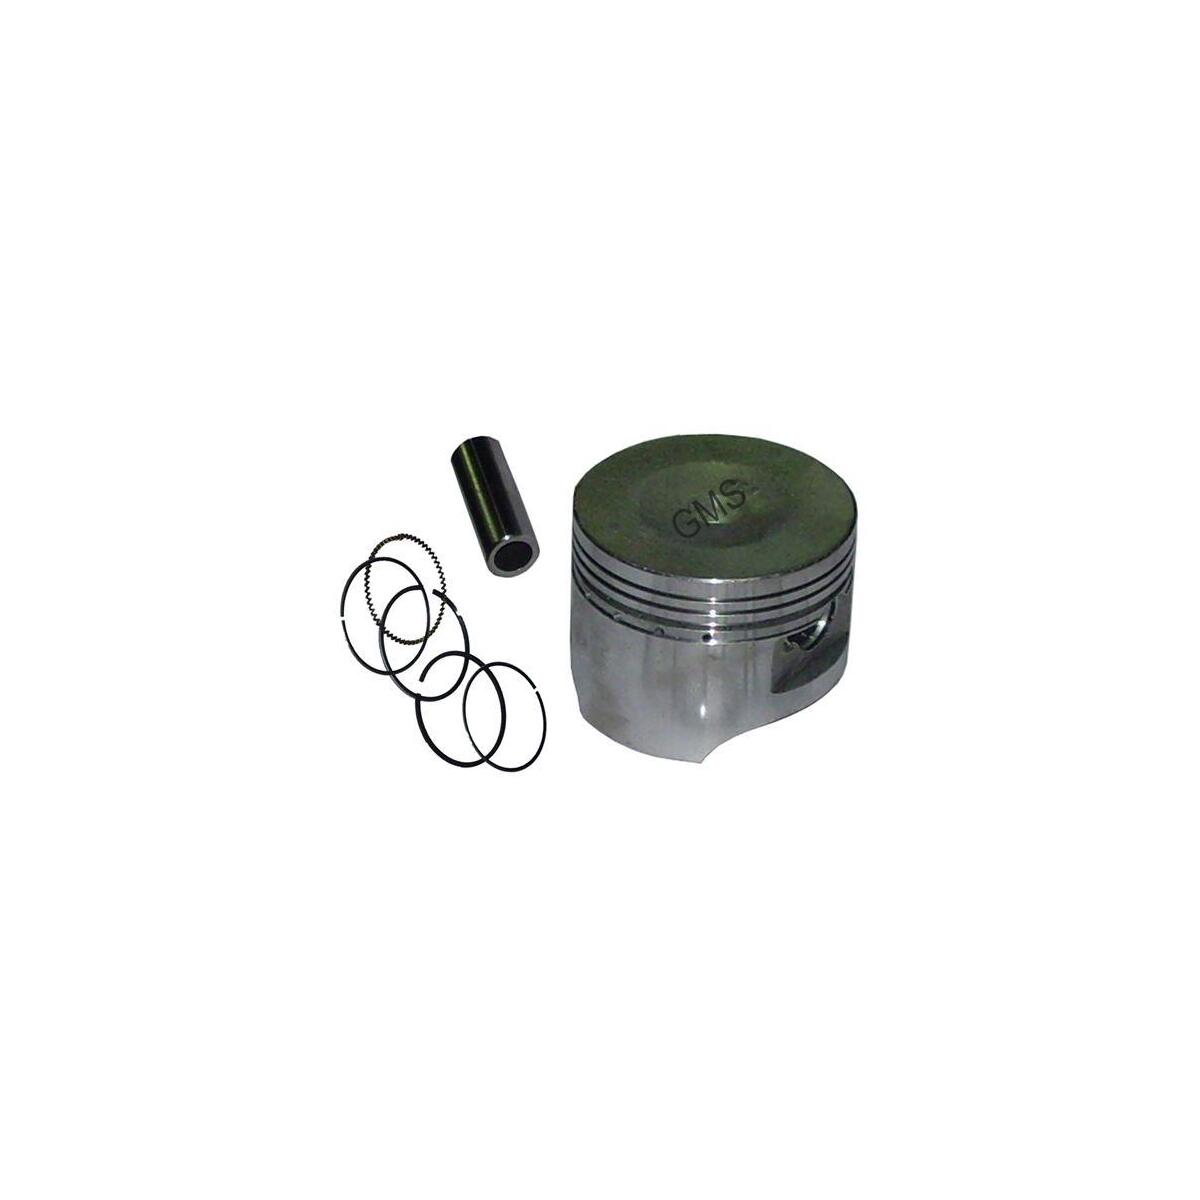 Cup Cup Piston Set 50,25Mm Cup-100